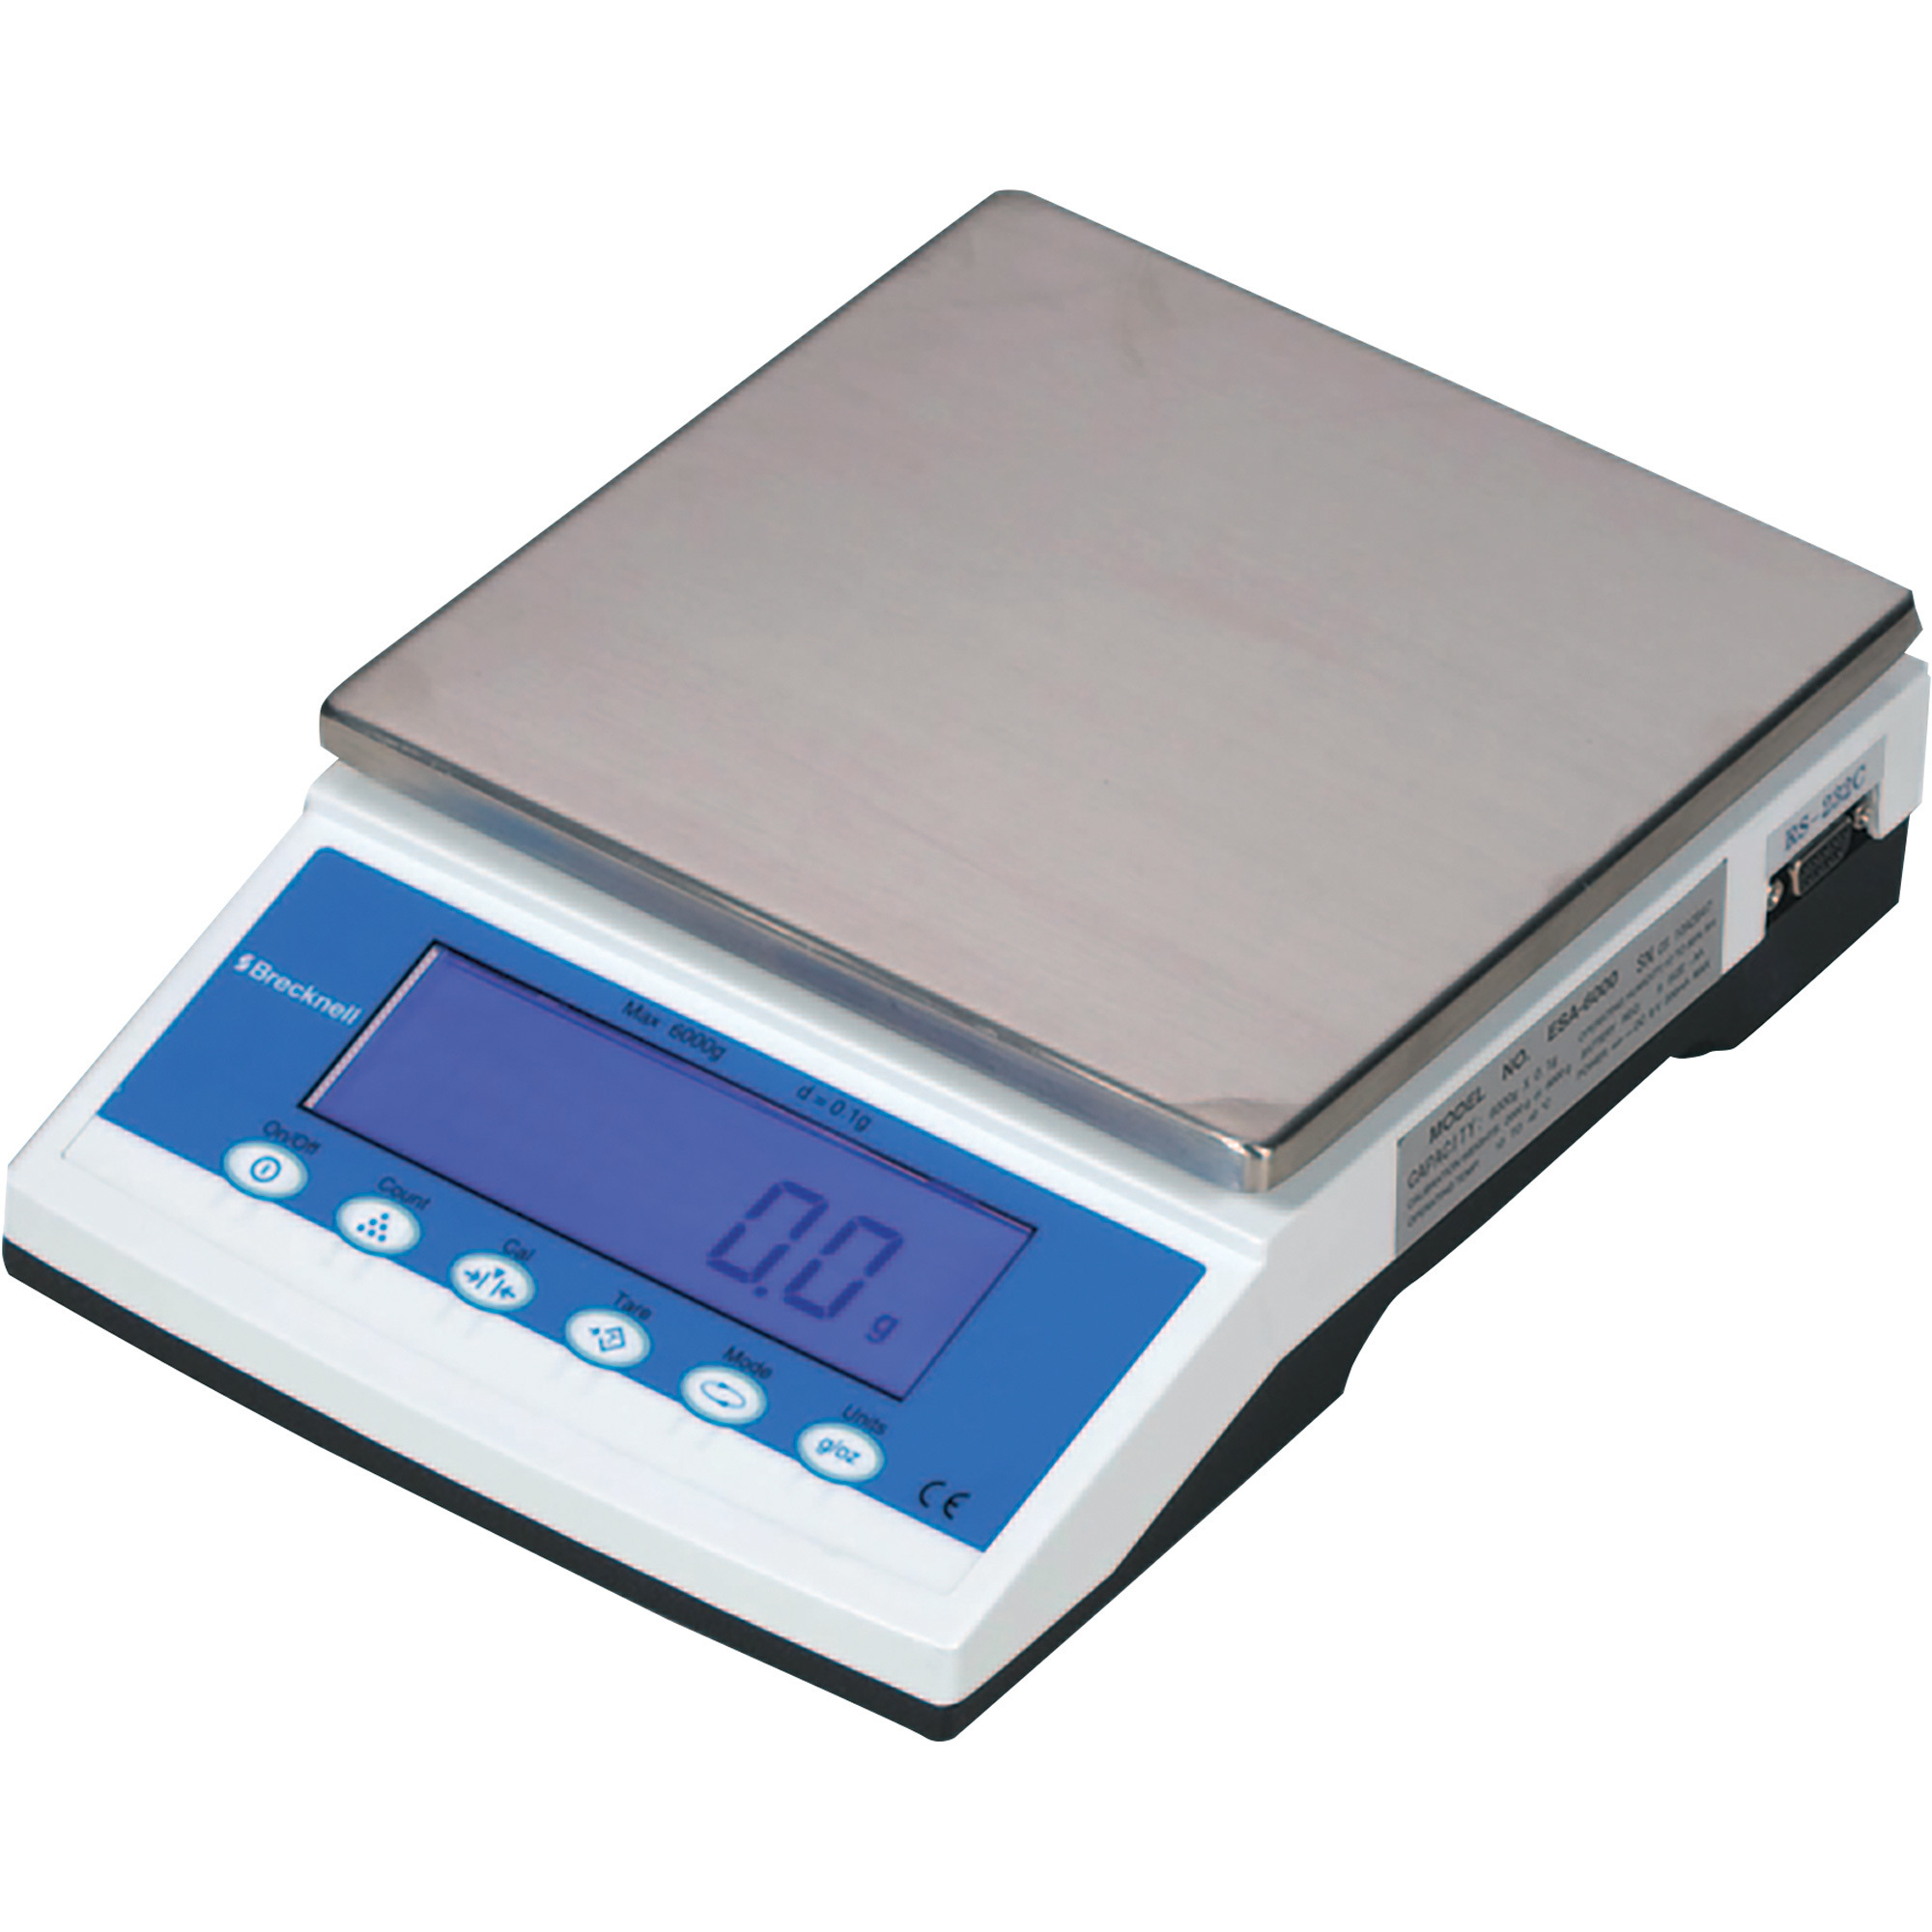 Brecknell MBS Precision Balance Scale, 6000G/13.22-Lb. Capacity, Model 816965004928